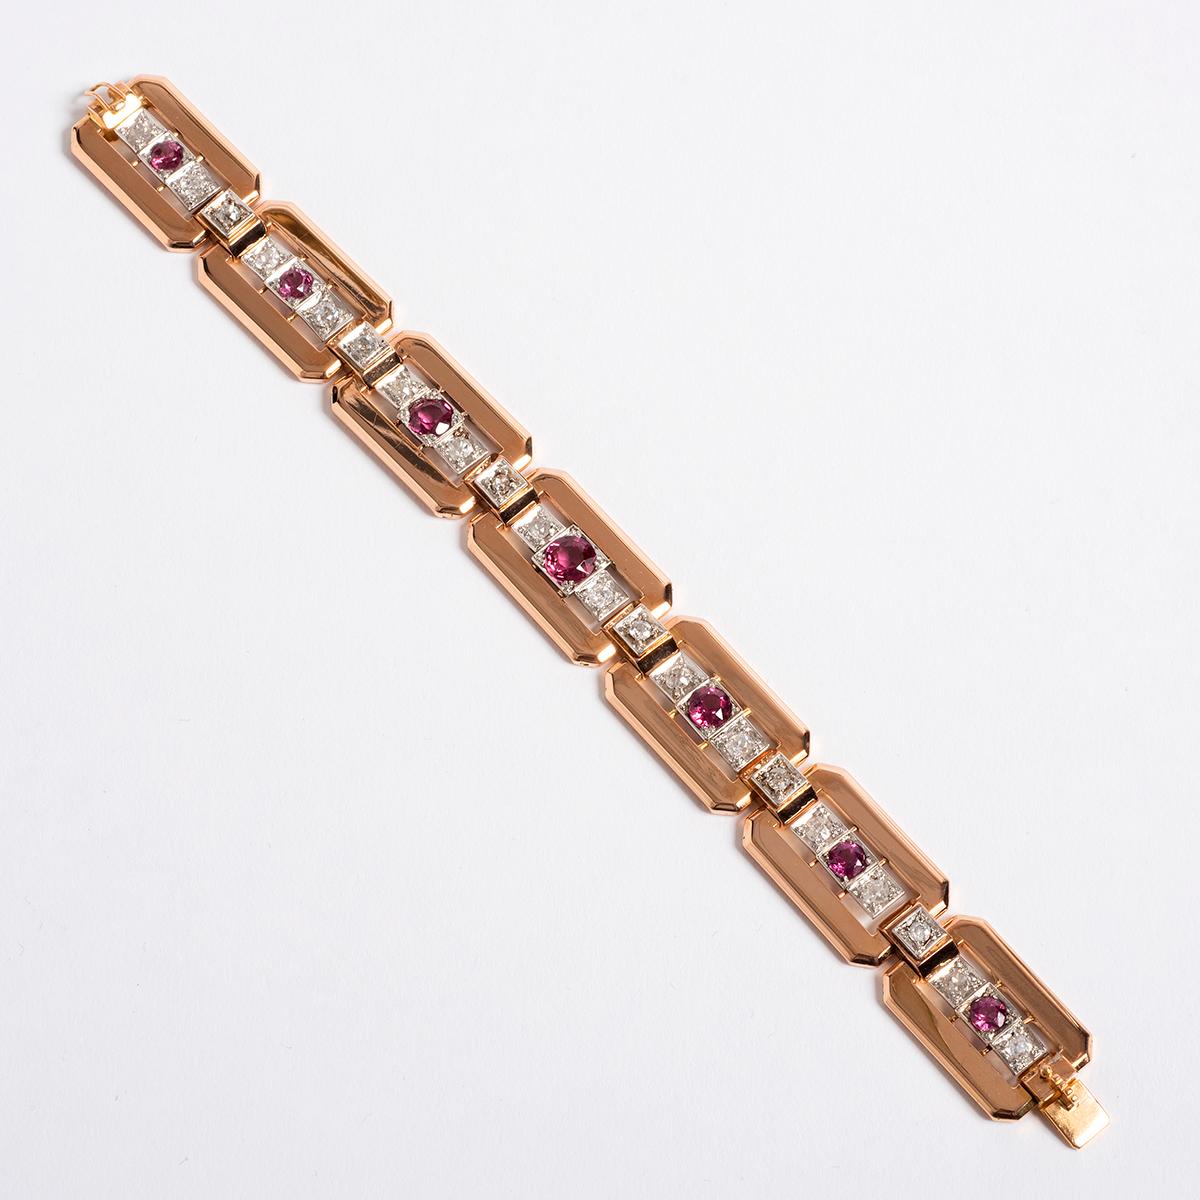 A unique piece within our carefully curated Vintage & Prestige fine jewellery collection, we are delighted to present the following:

Our extremely rare and attractive Victorian era bracelet is 18k rose gold and is set with garnets and twenty old